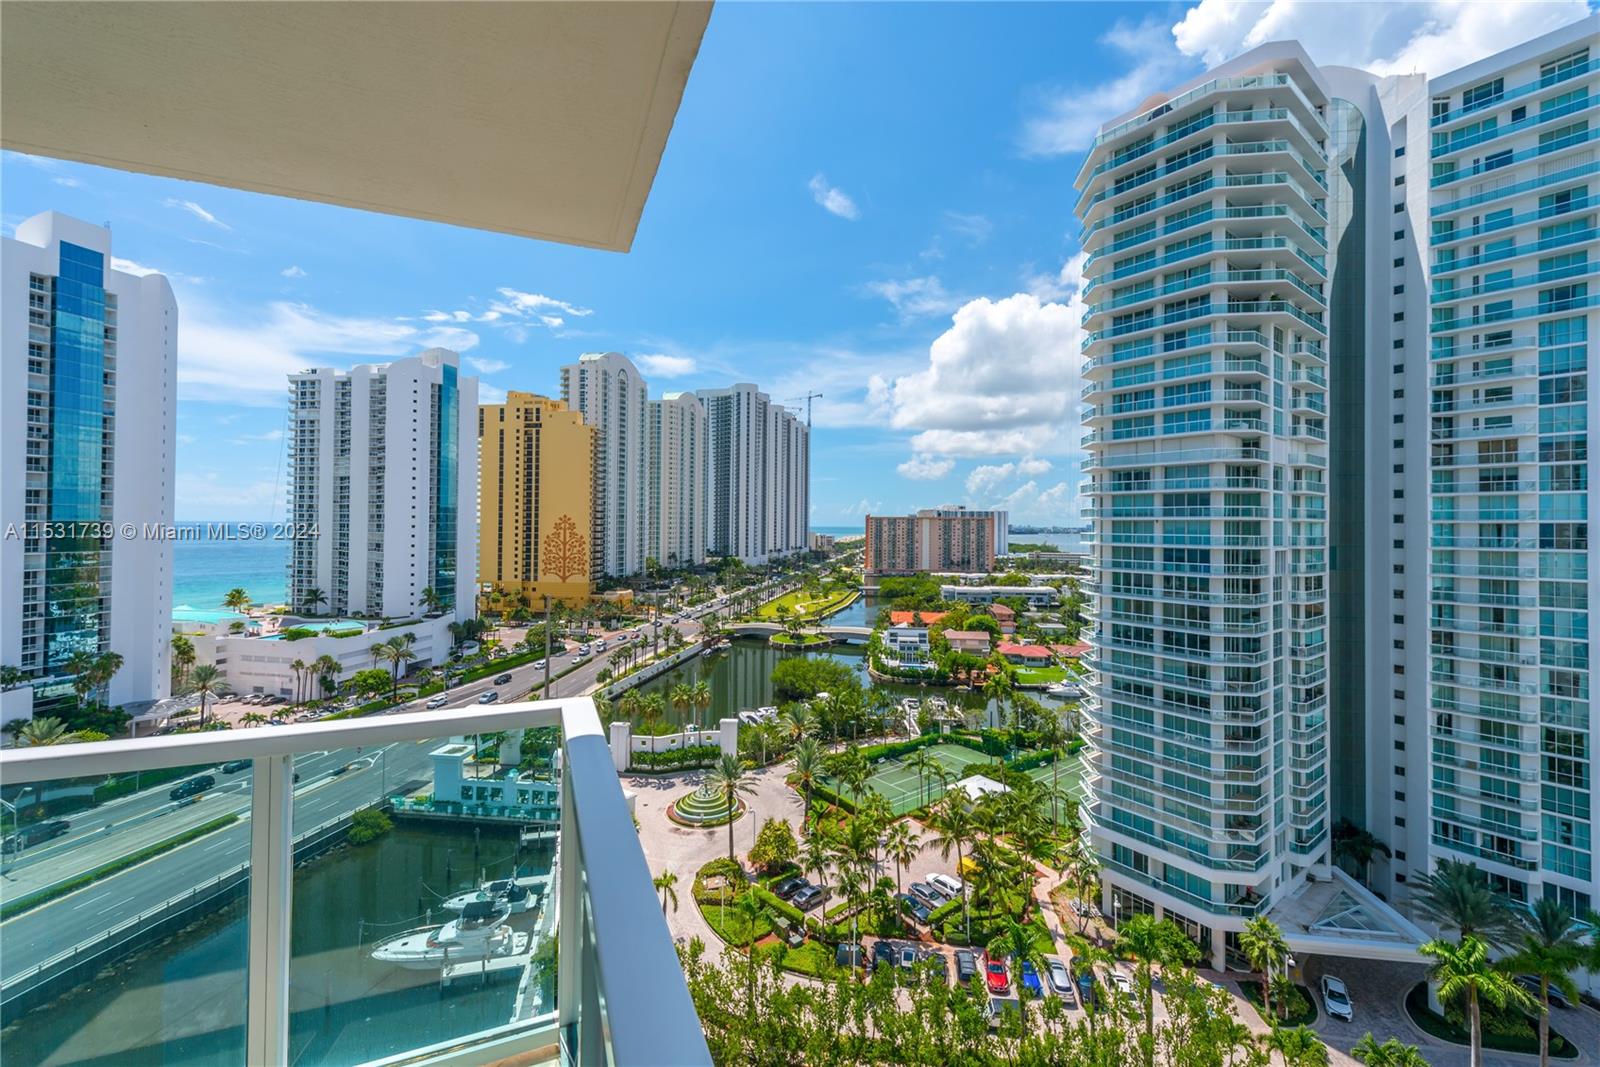 Address Not Disclosed, Sunny Isles Beach, Miami-Dade County, Florida - 3 Bedrooms  
2 Bathrooms - 